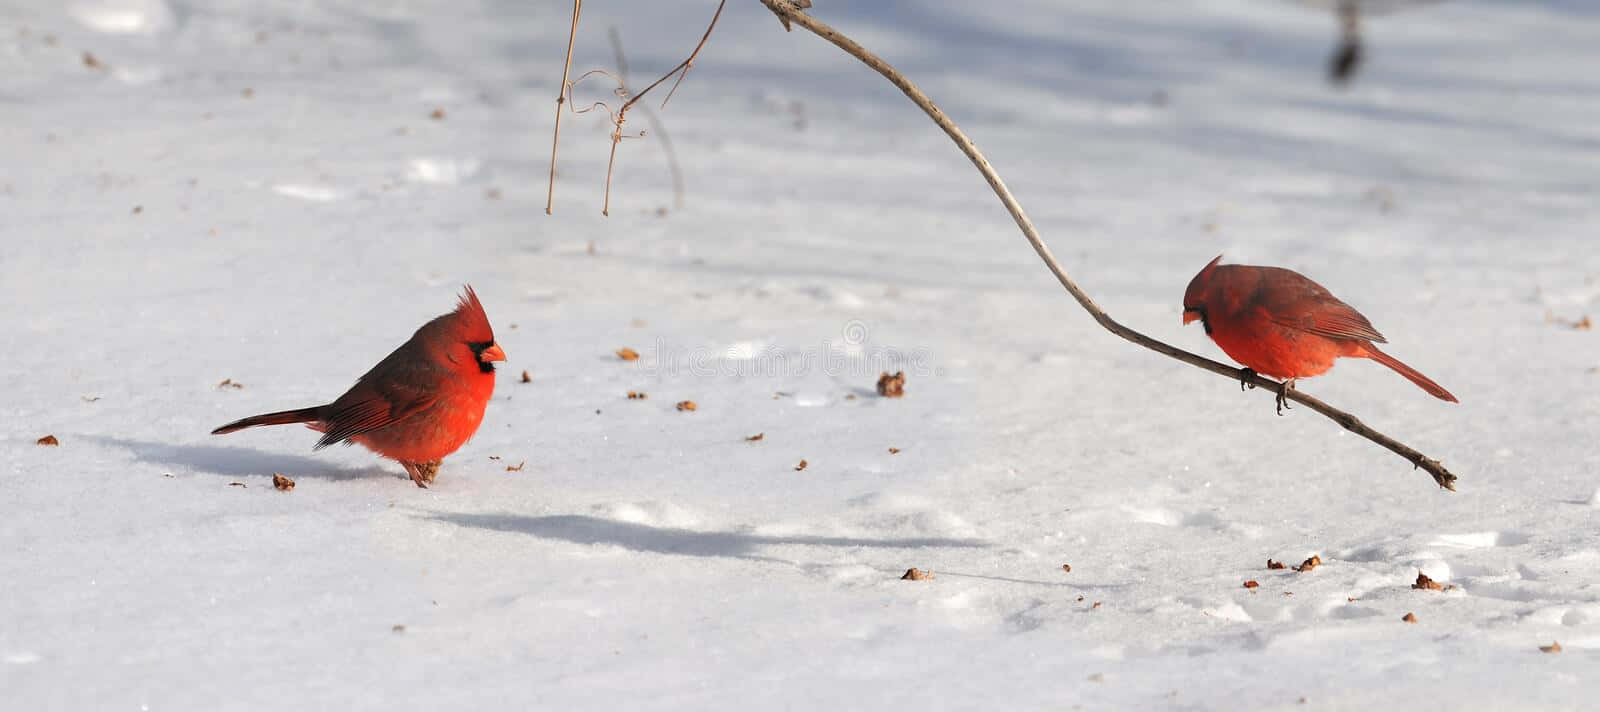 Enjoy the beauty of a vibrant Red Cardinal